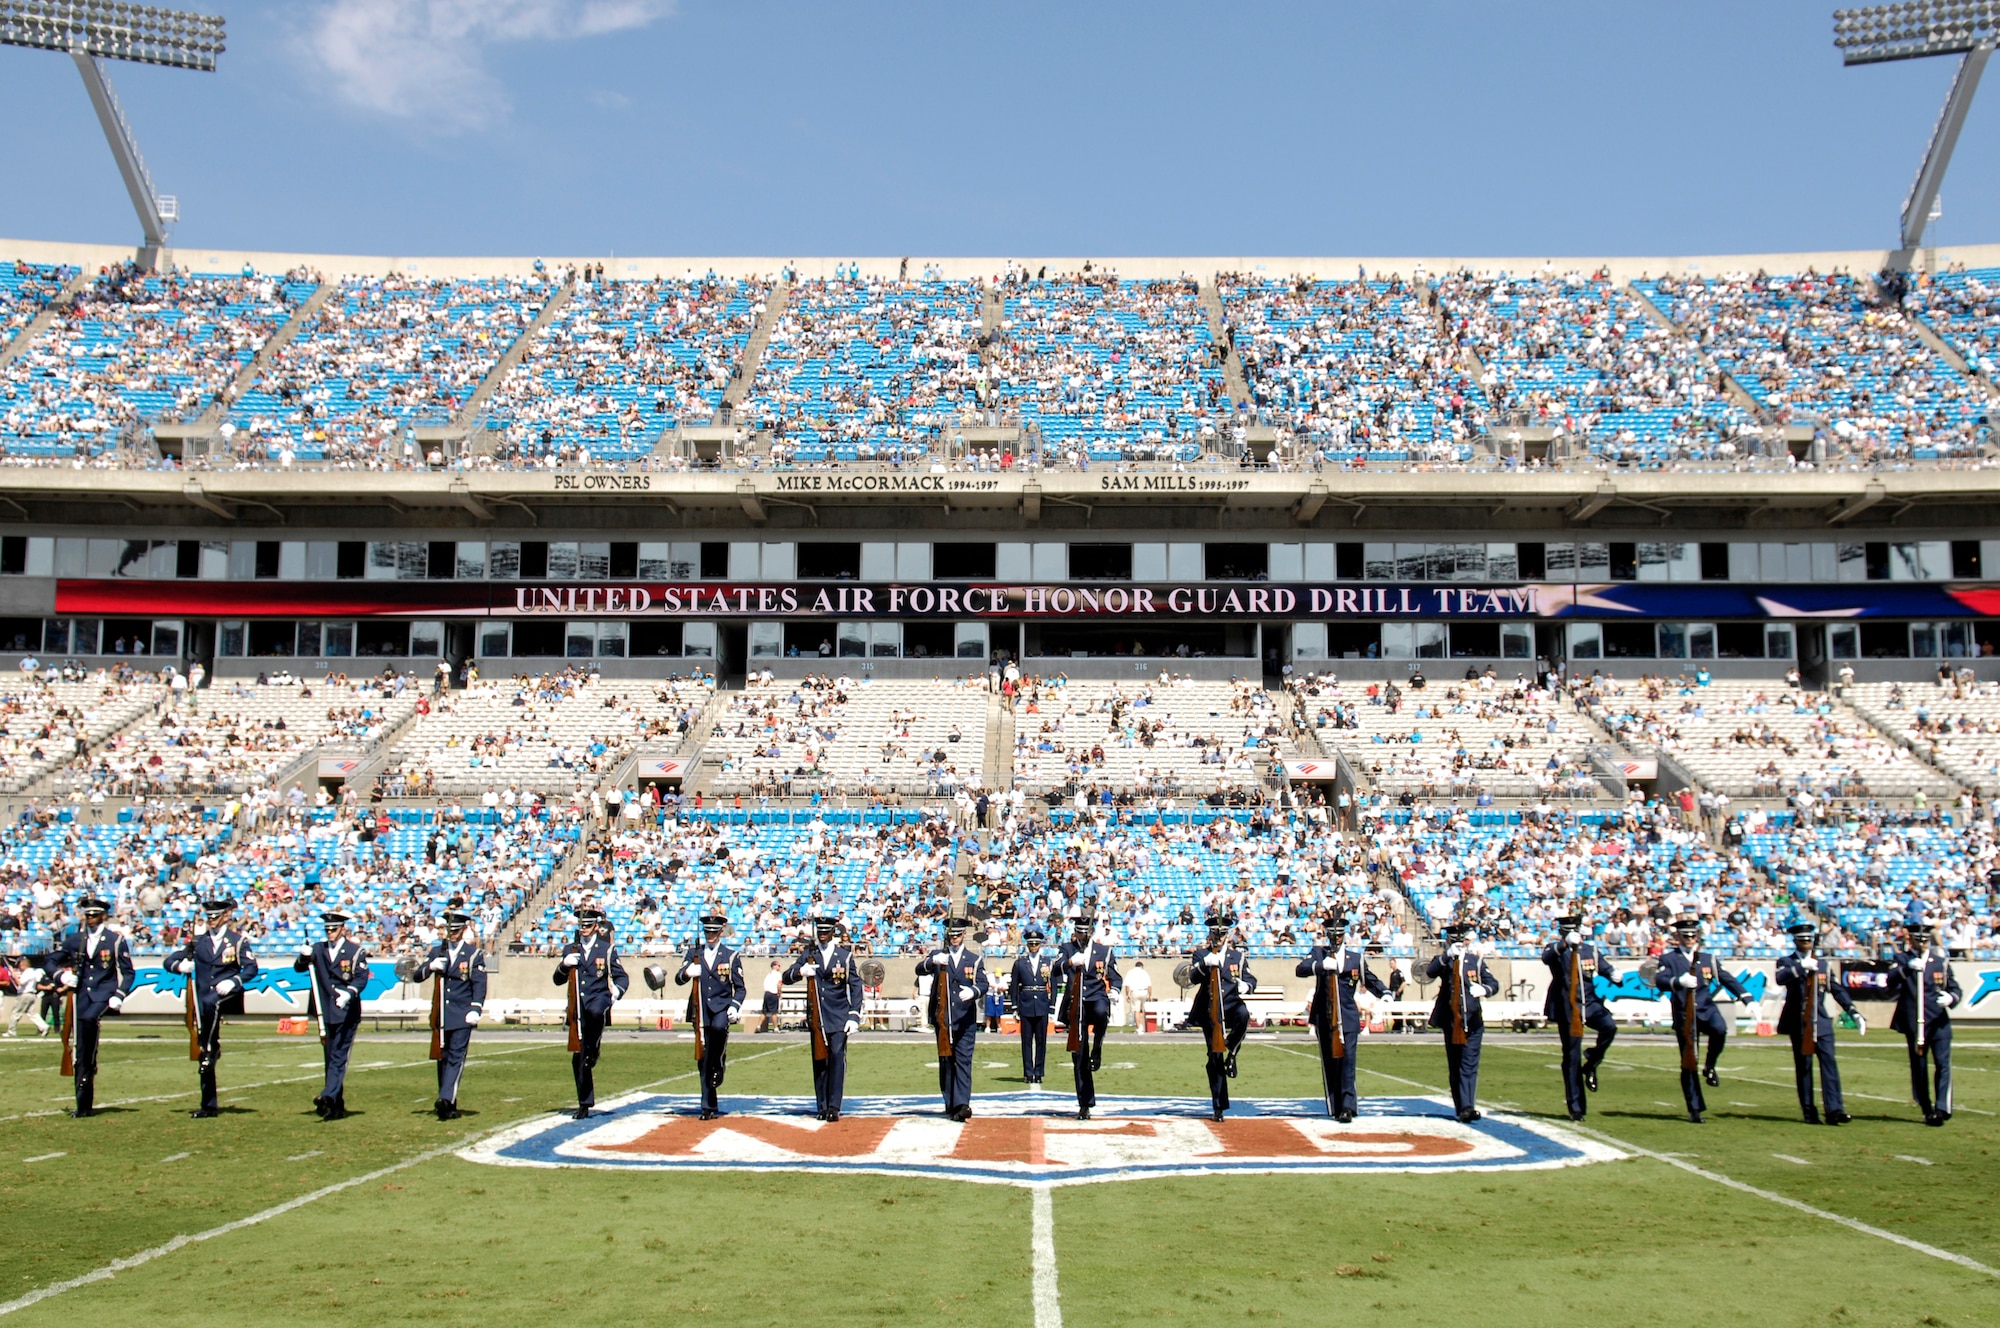 Members of the USAF Honor Guard Drill Team perform during halftime at the NFL's Carolina Panthers vs. Houston Texans football game. During their recent tour, the Drill Team joined all three major AF installations in New Mexico for their joint AF Ball and then the NFL at the Carolina Panthers game, focused on their mission to recruit, retain and inspire while celebrating the AF 60th Birthday.(U.S. Air Force photo by Senior Airman Daniel DeCook)(Released)